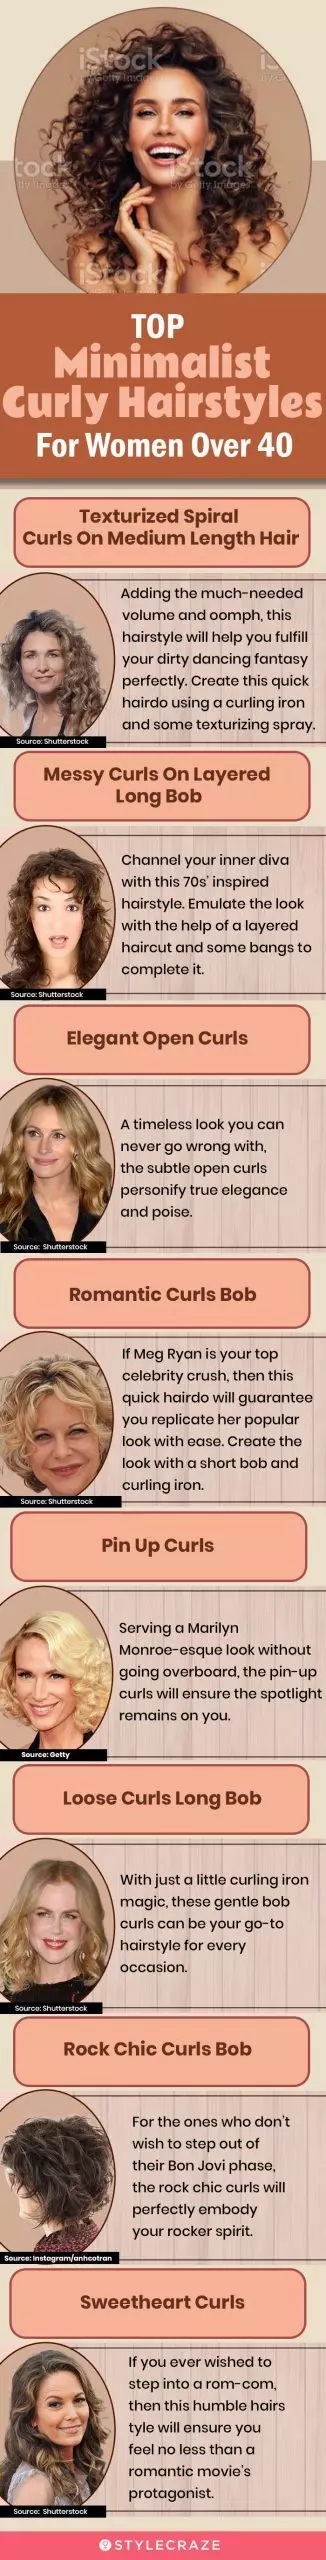 Top Minimalist Curly Hairstyles For Women Over 40 (infographic)